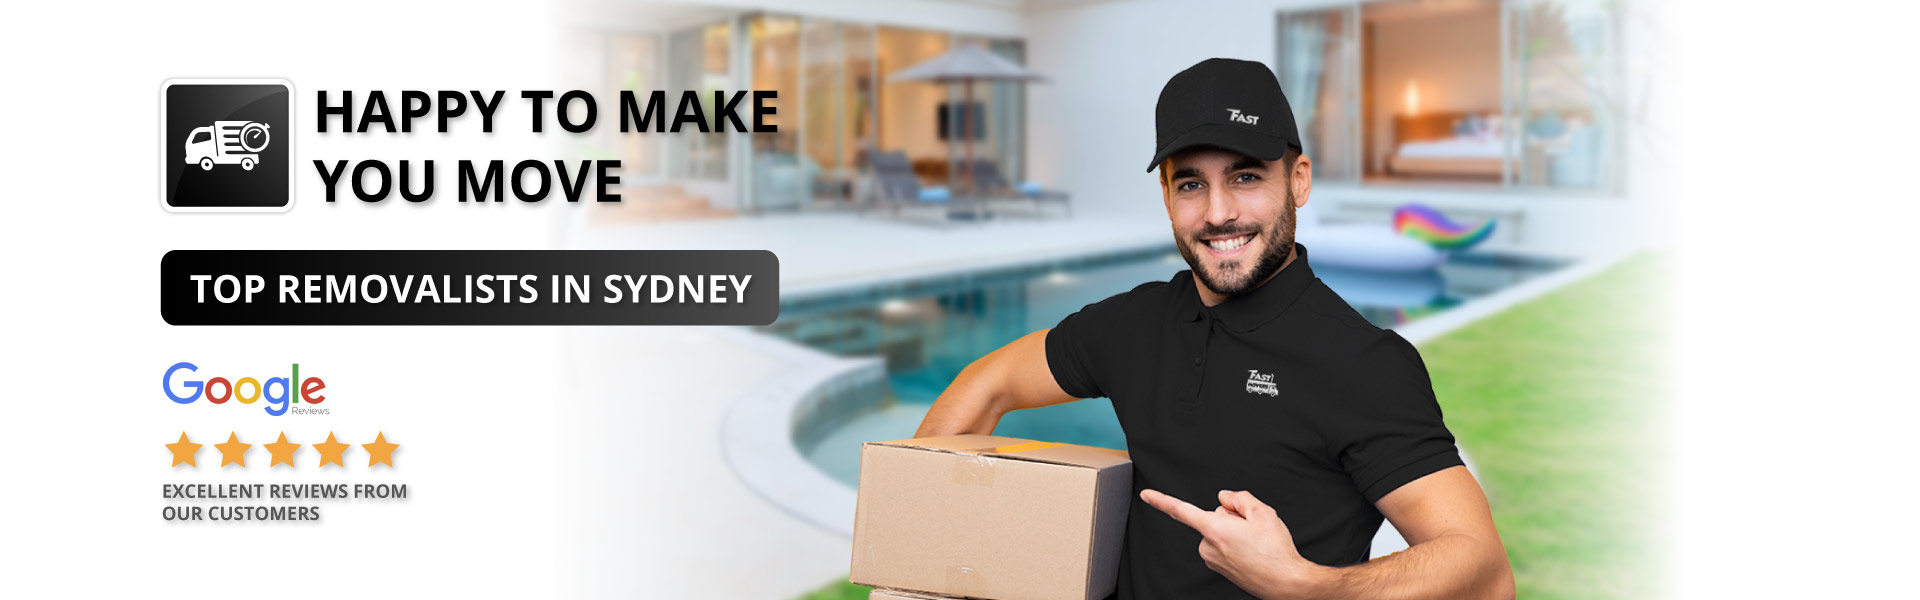 Removalists in Sydney - Fast Movers - Banner Top 09